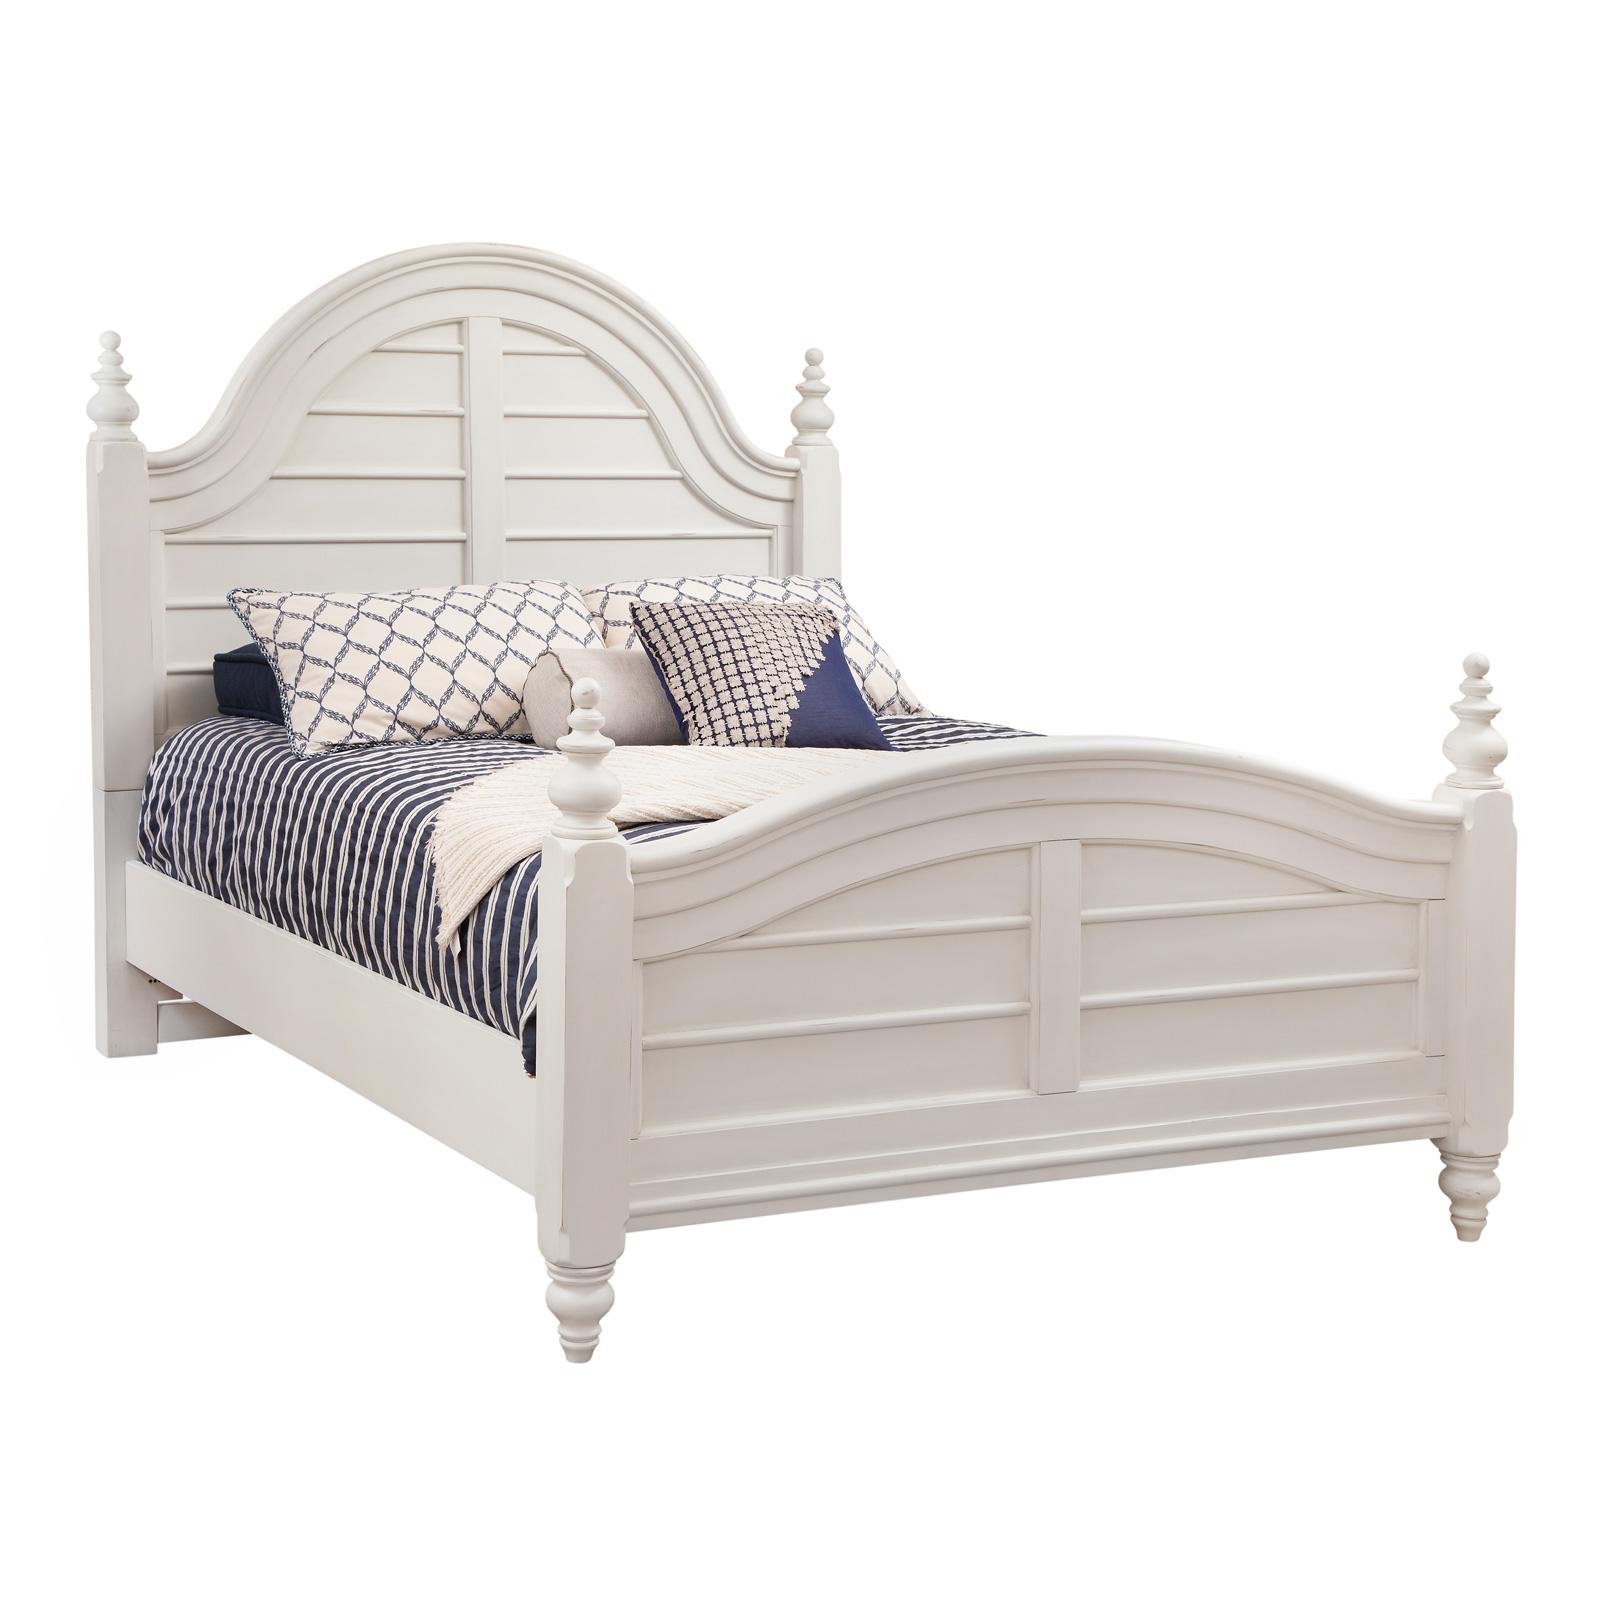 Traditional, Youth, Cottage Panel Bed Rodanthe 3910-50PNPN 3910-50PNPN in White 